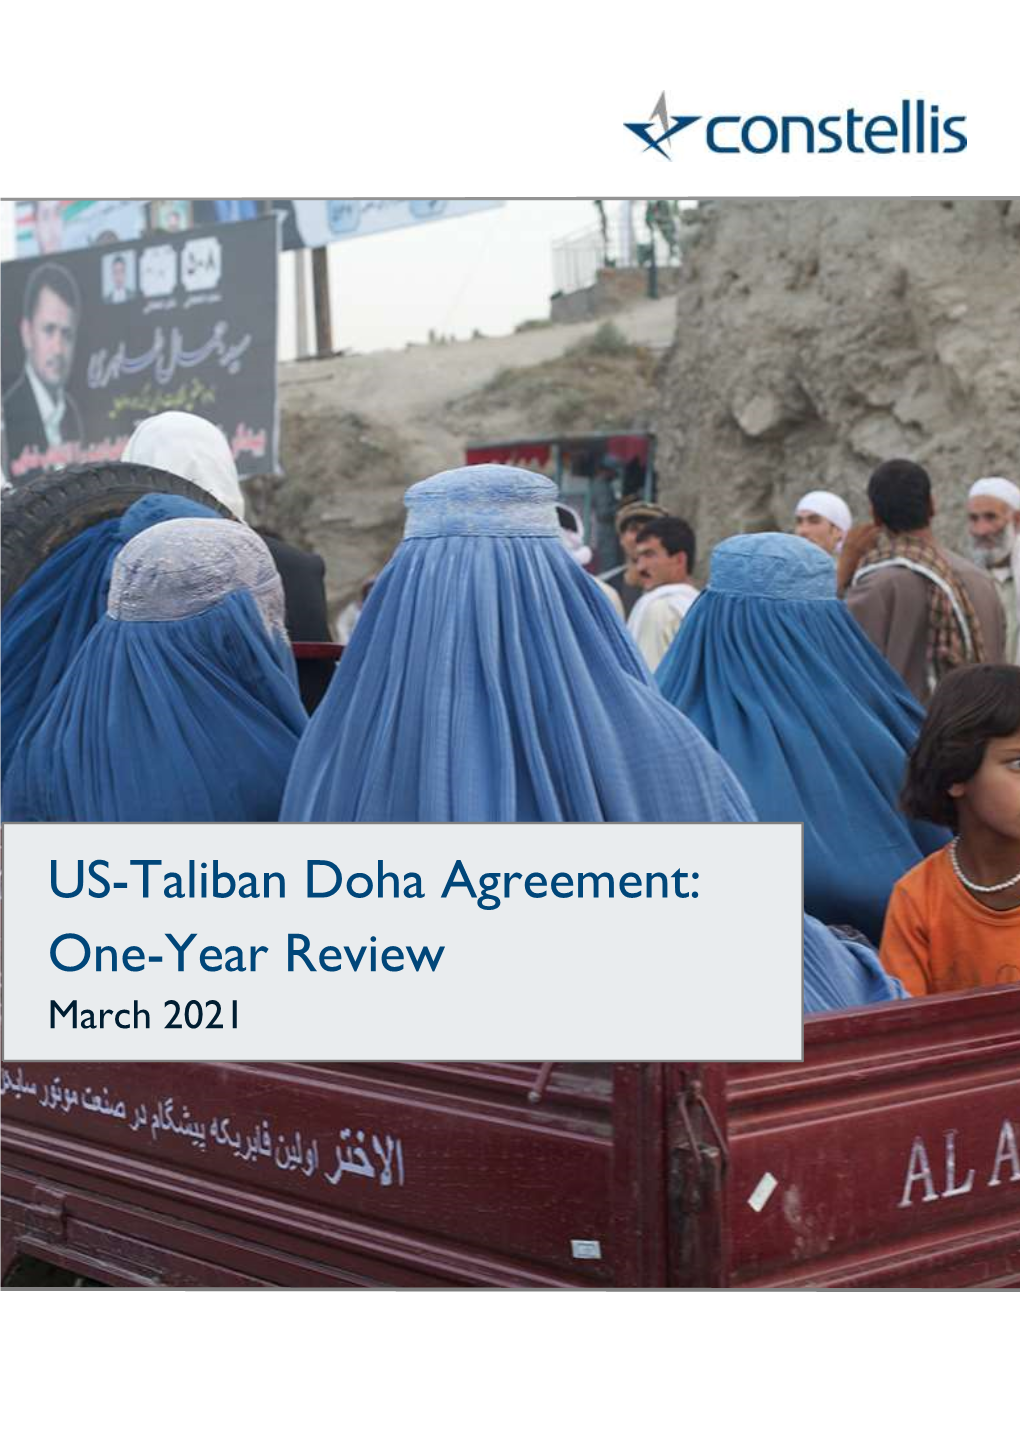 US-Taliban Doha Agreement: One-Year Review